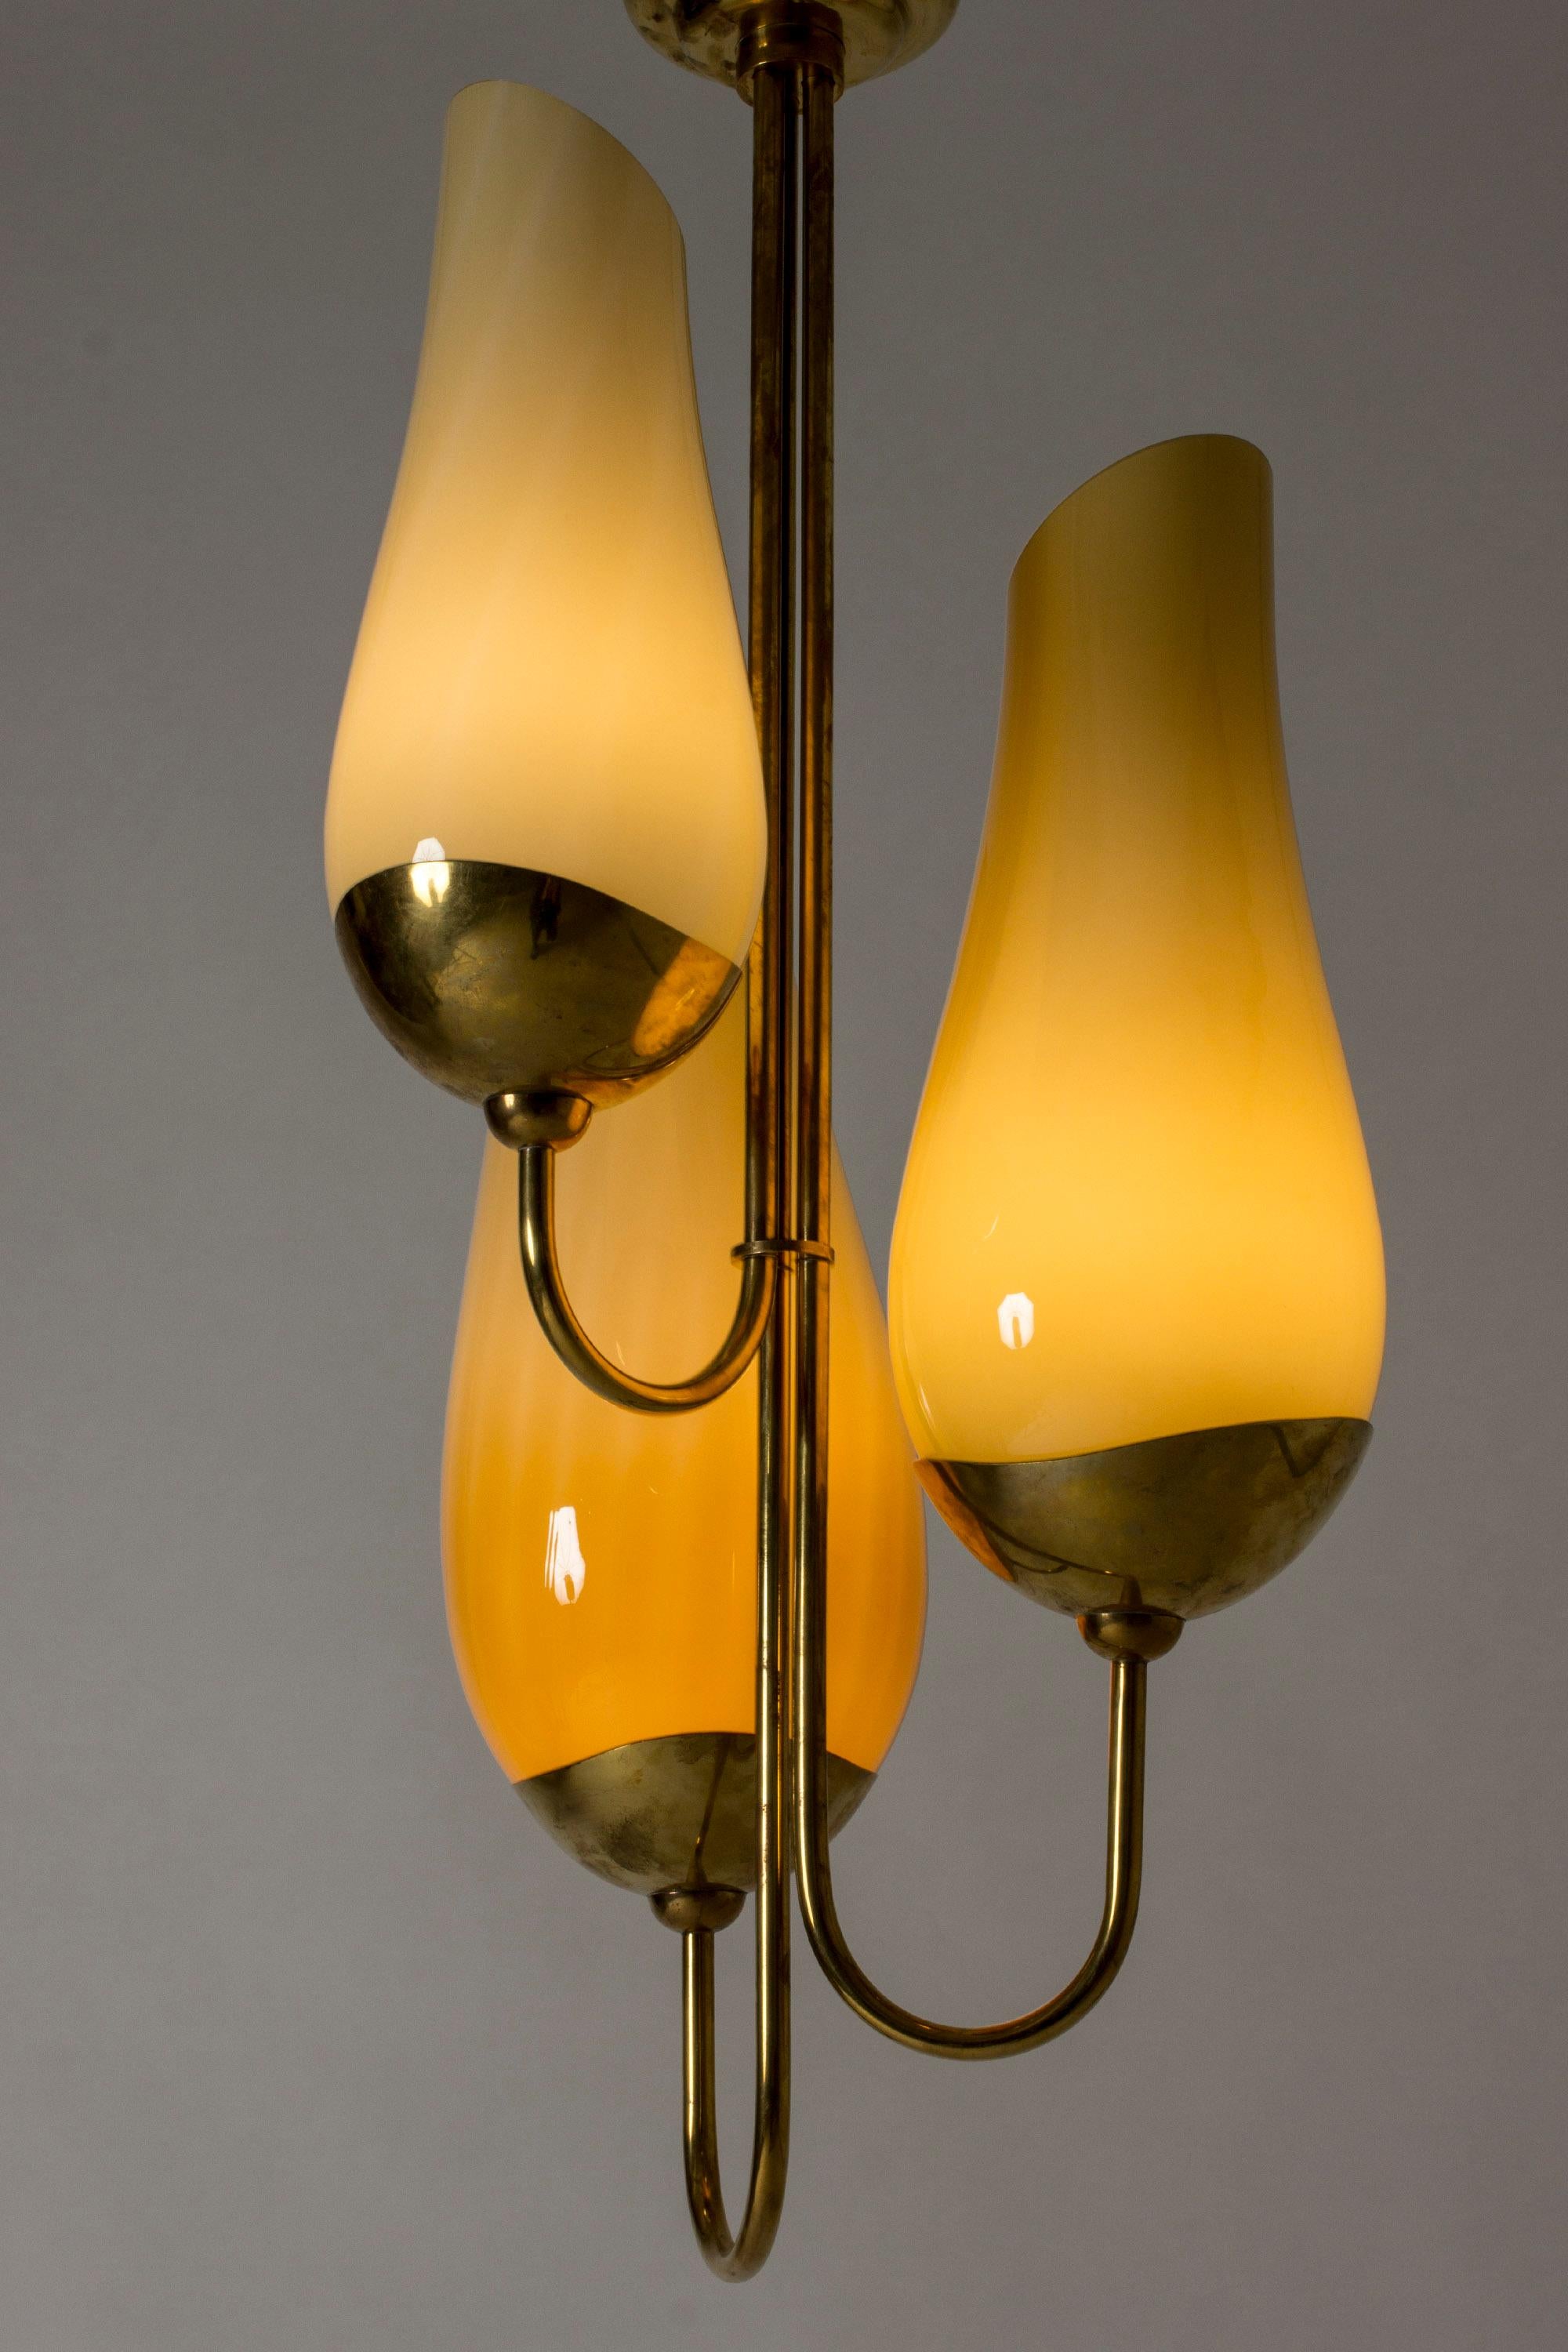 Scandinavian Modern Brass and Glass Cgandelier by Paavo Tynell and Gunnel Nyman for Taito Oy, 1940s For Sale